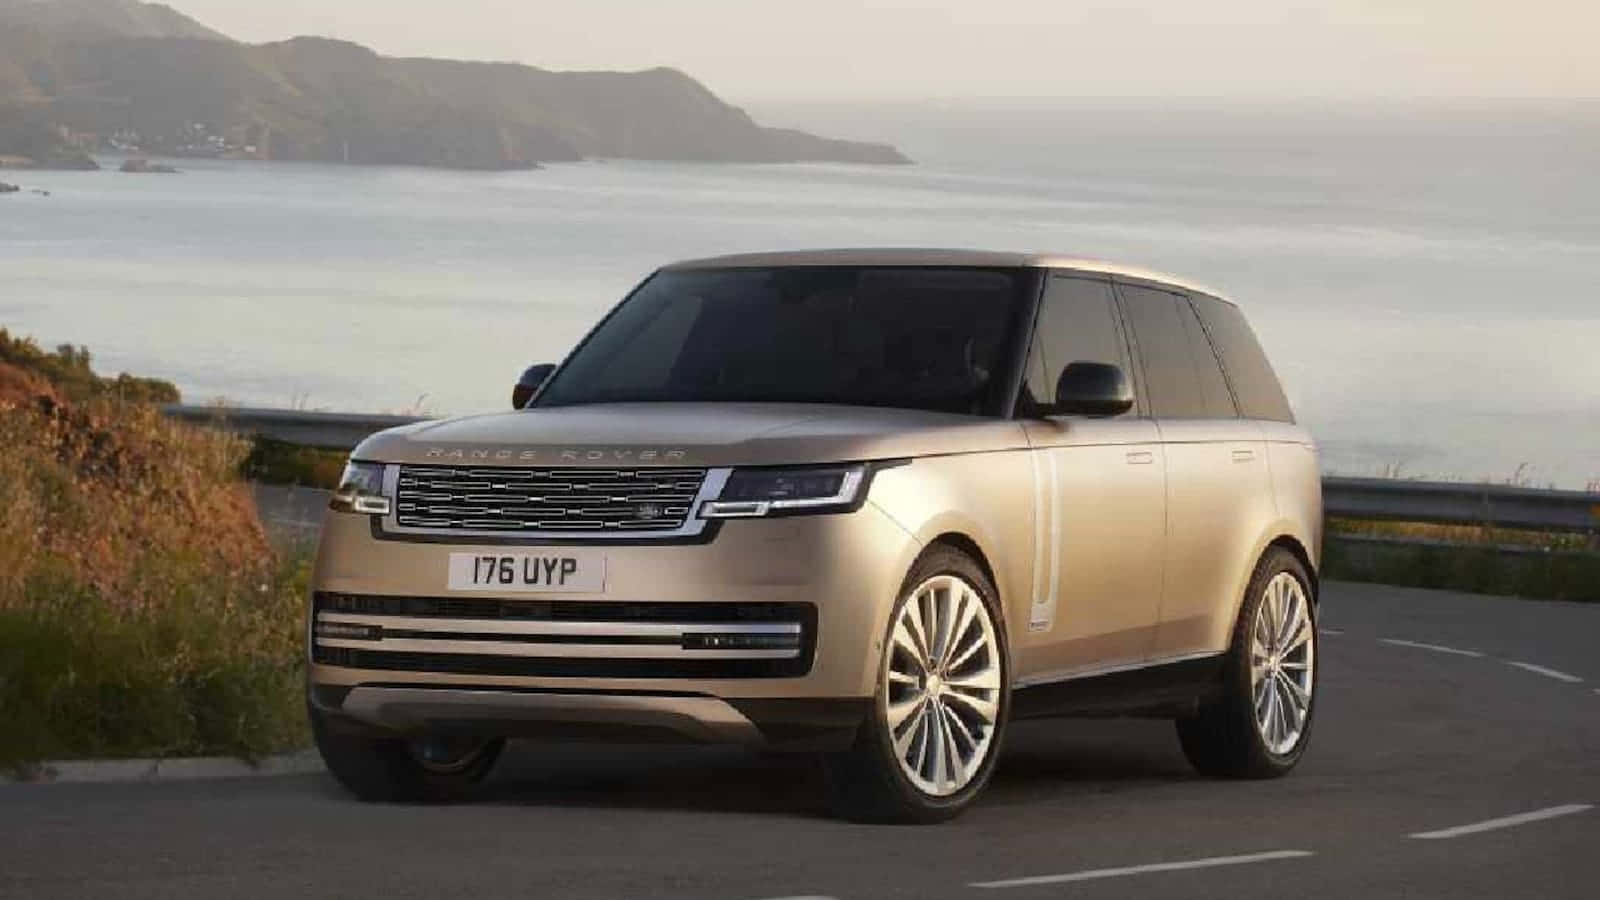 Luxurious and All-Terrain Driving: The Range Rover